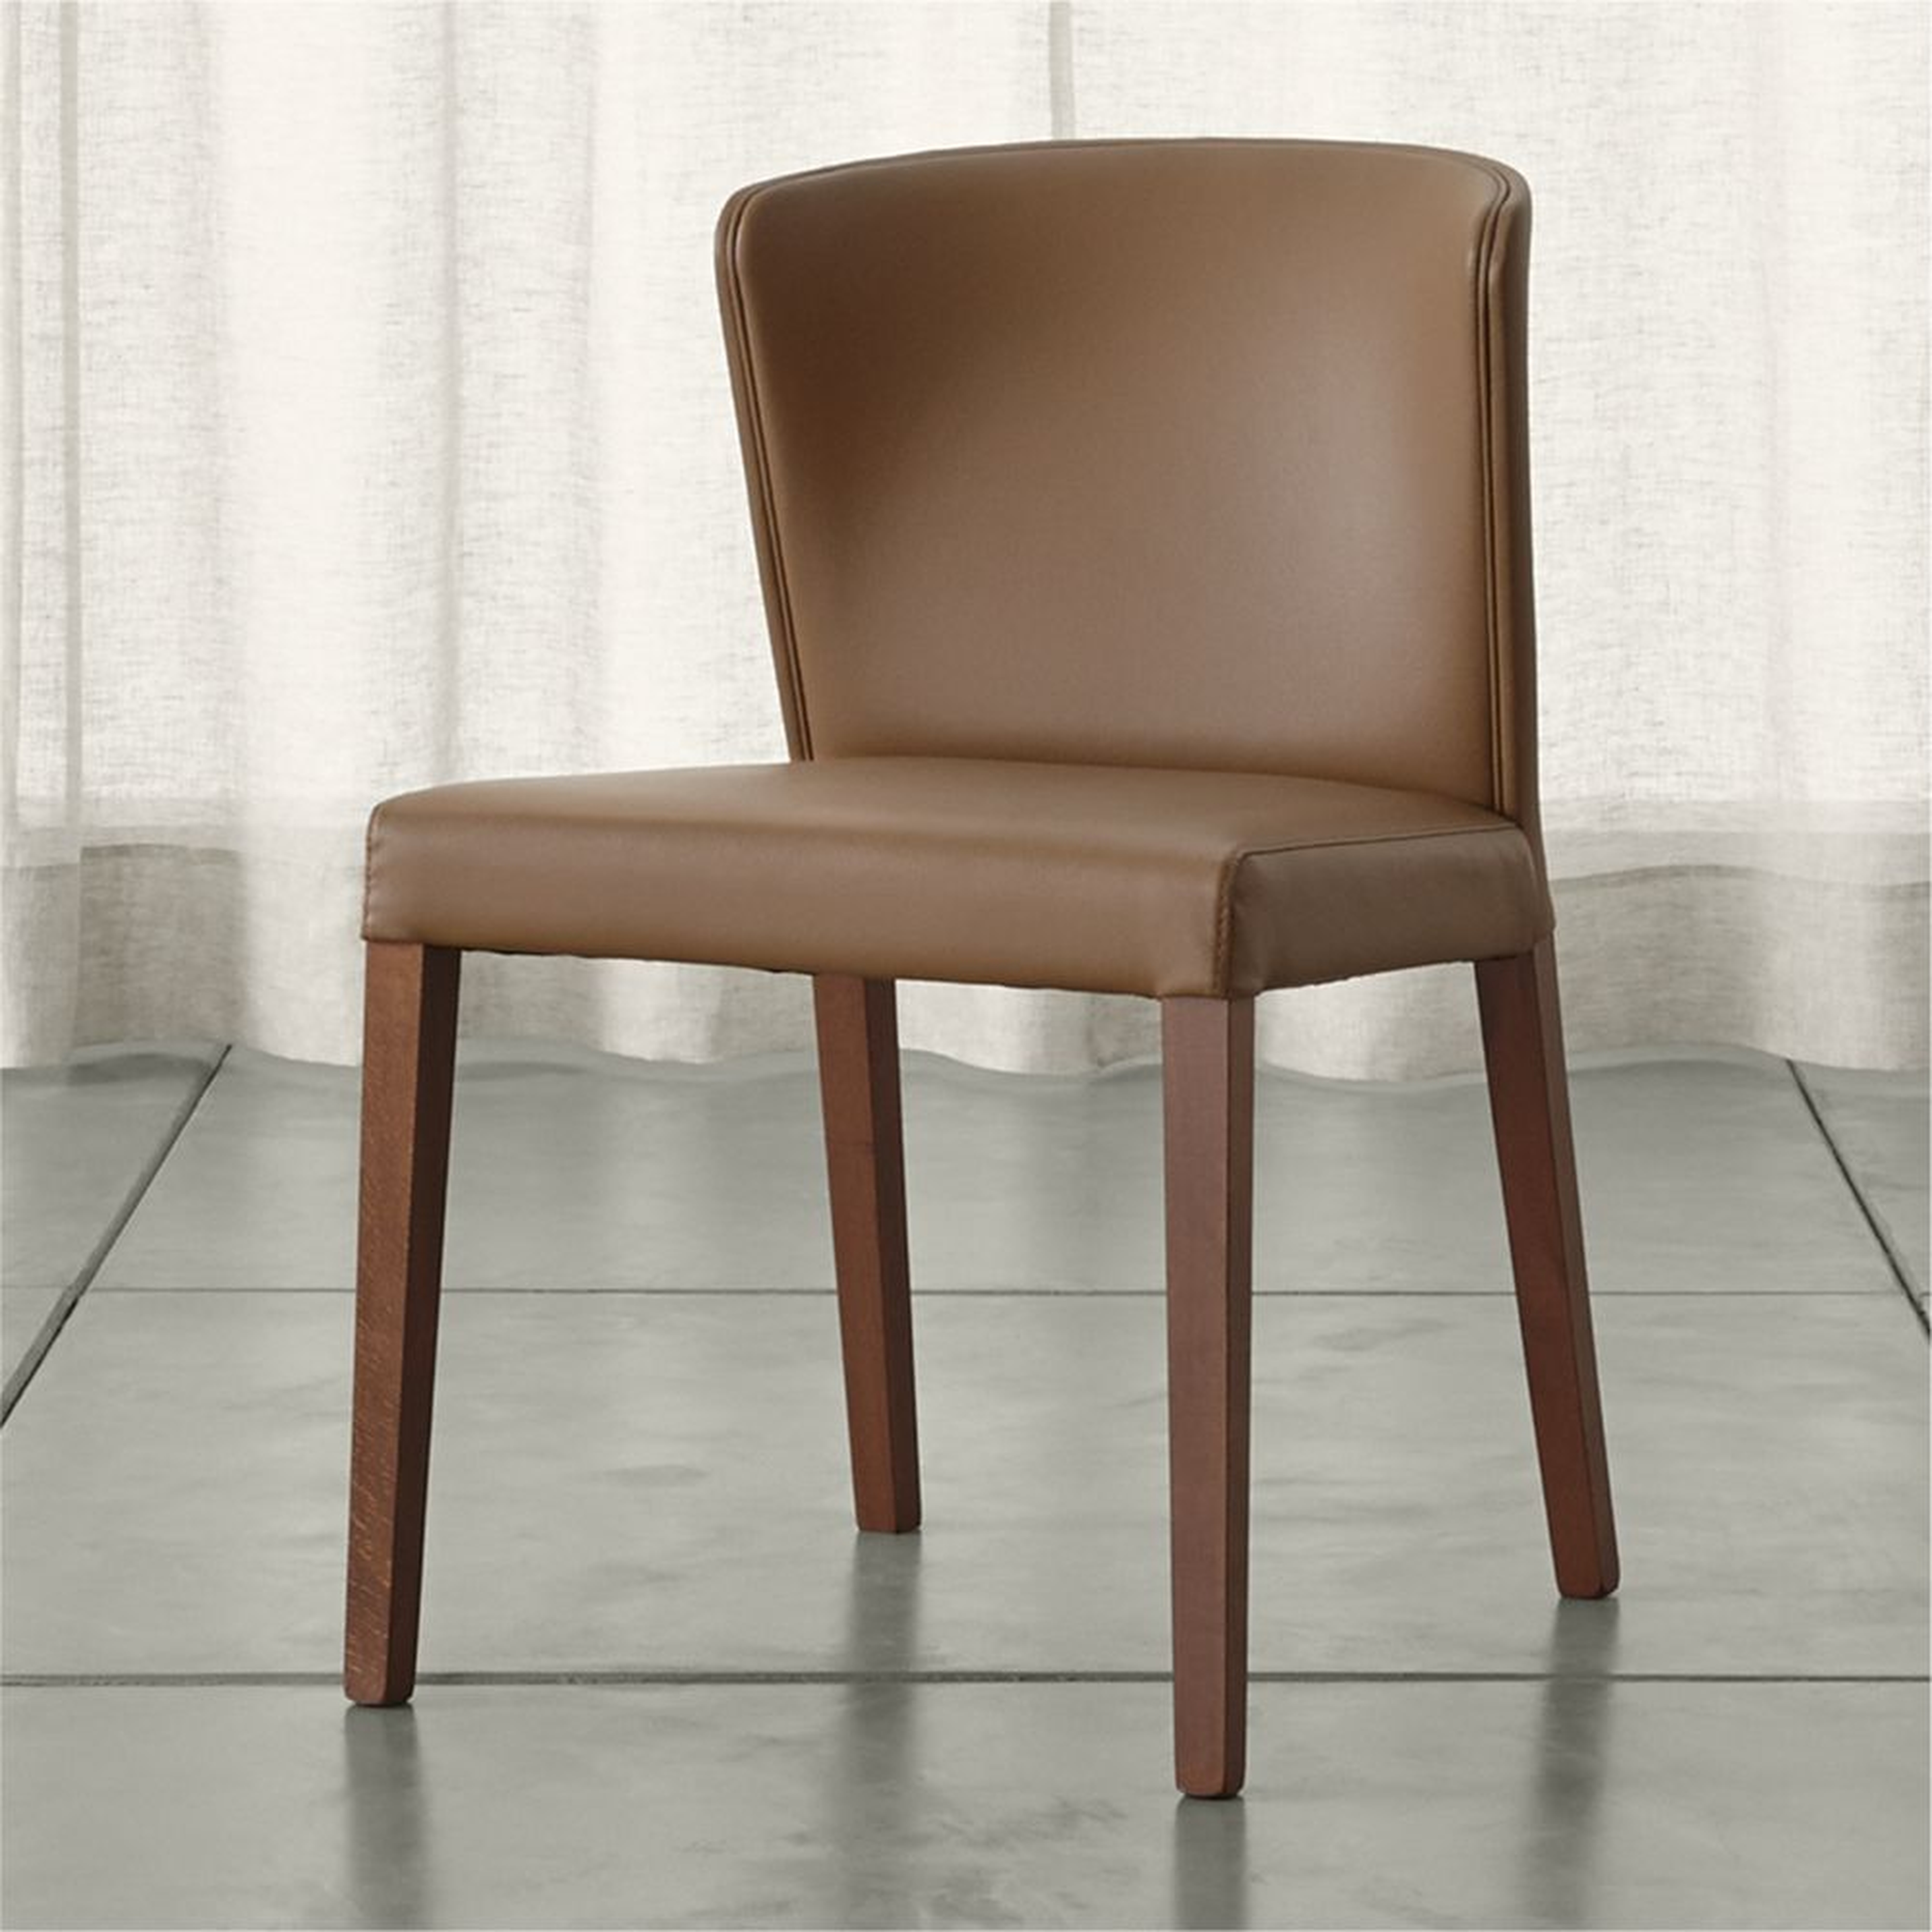 Curran Carmel Dining Chair - Crate and Barrel